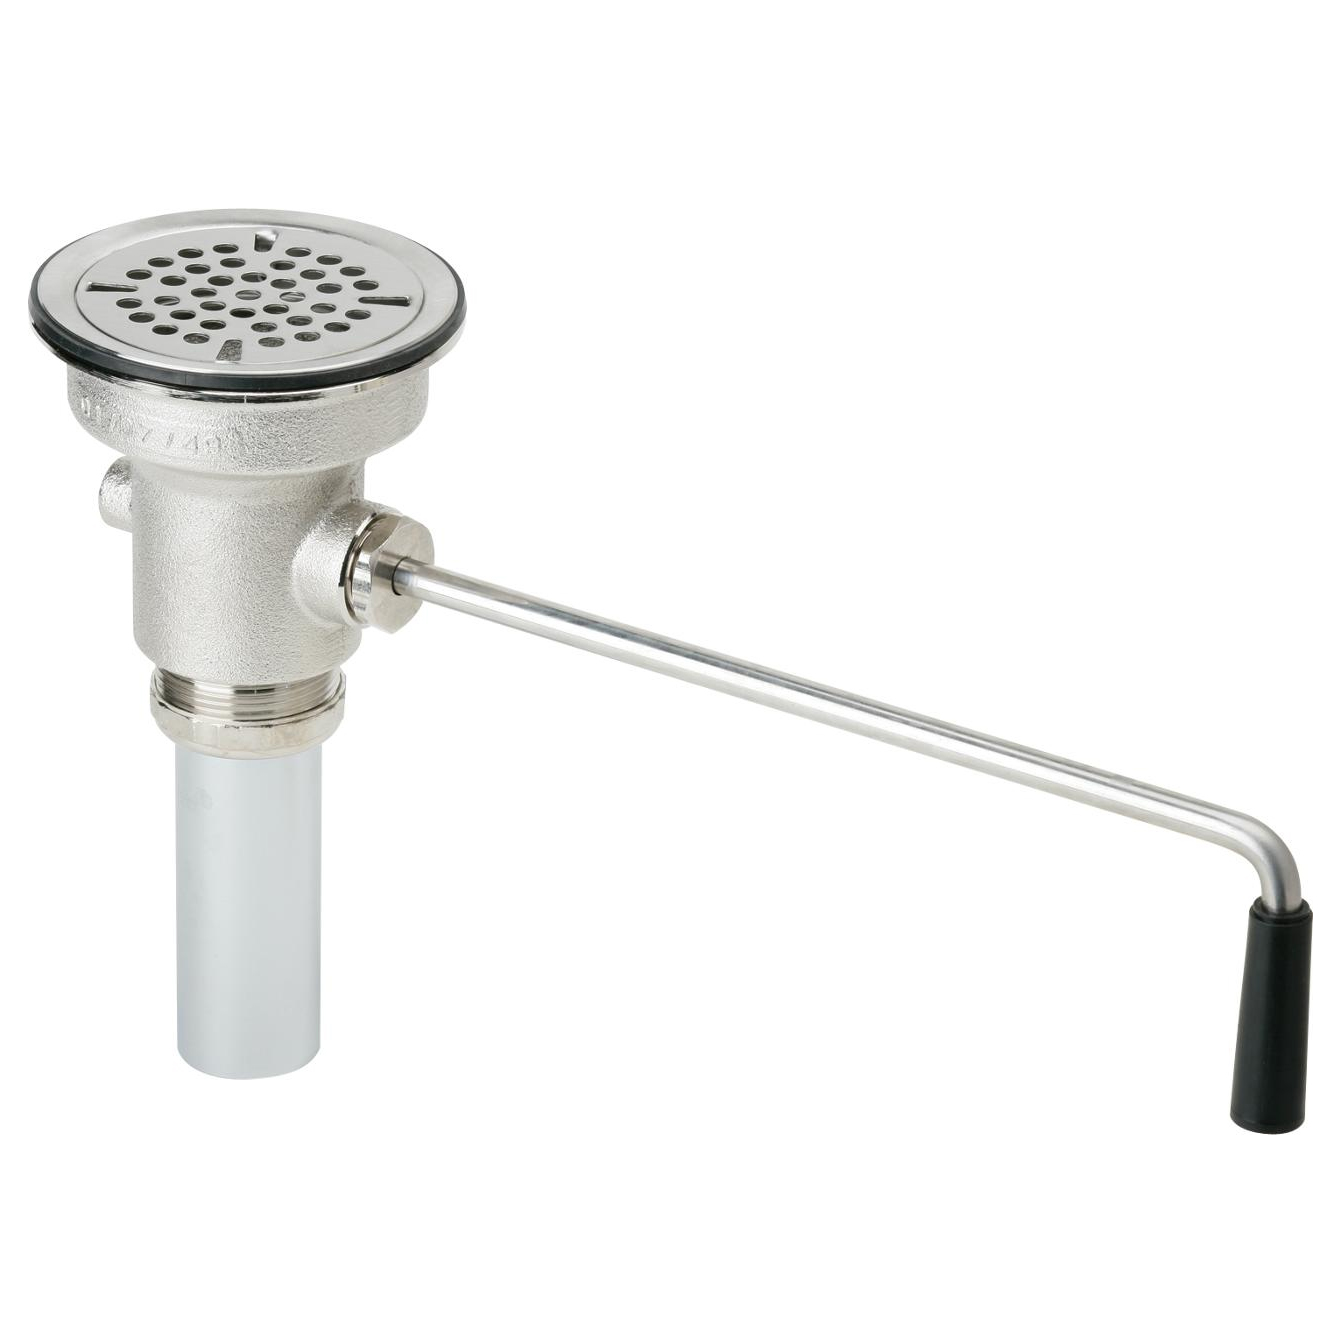 Drain Fitting Rotary Lever Operated w/1-1/2X4" Tailpiece